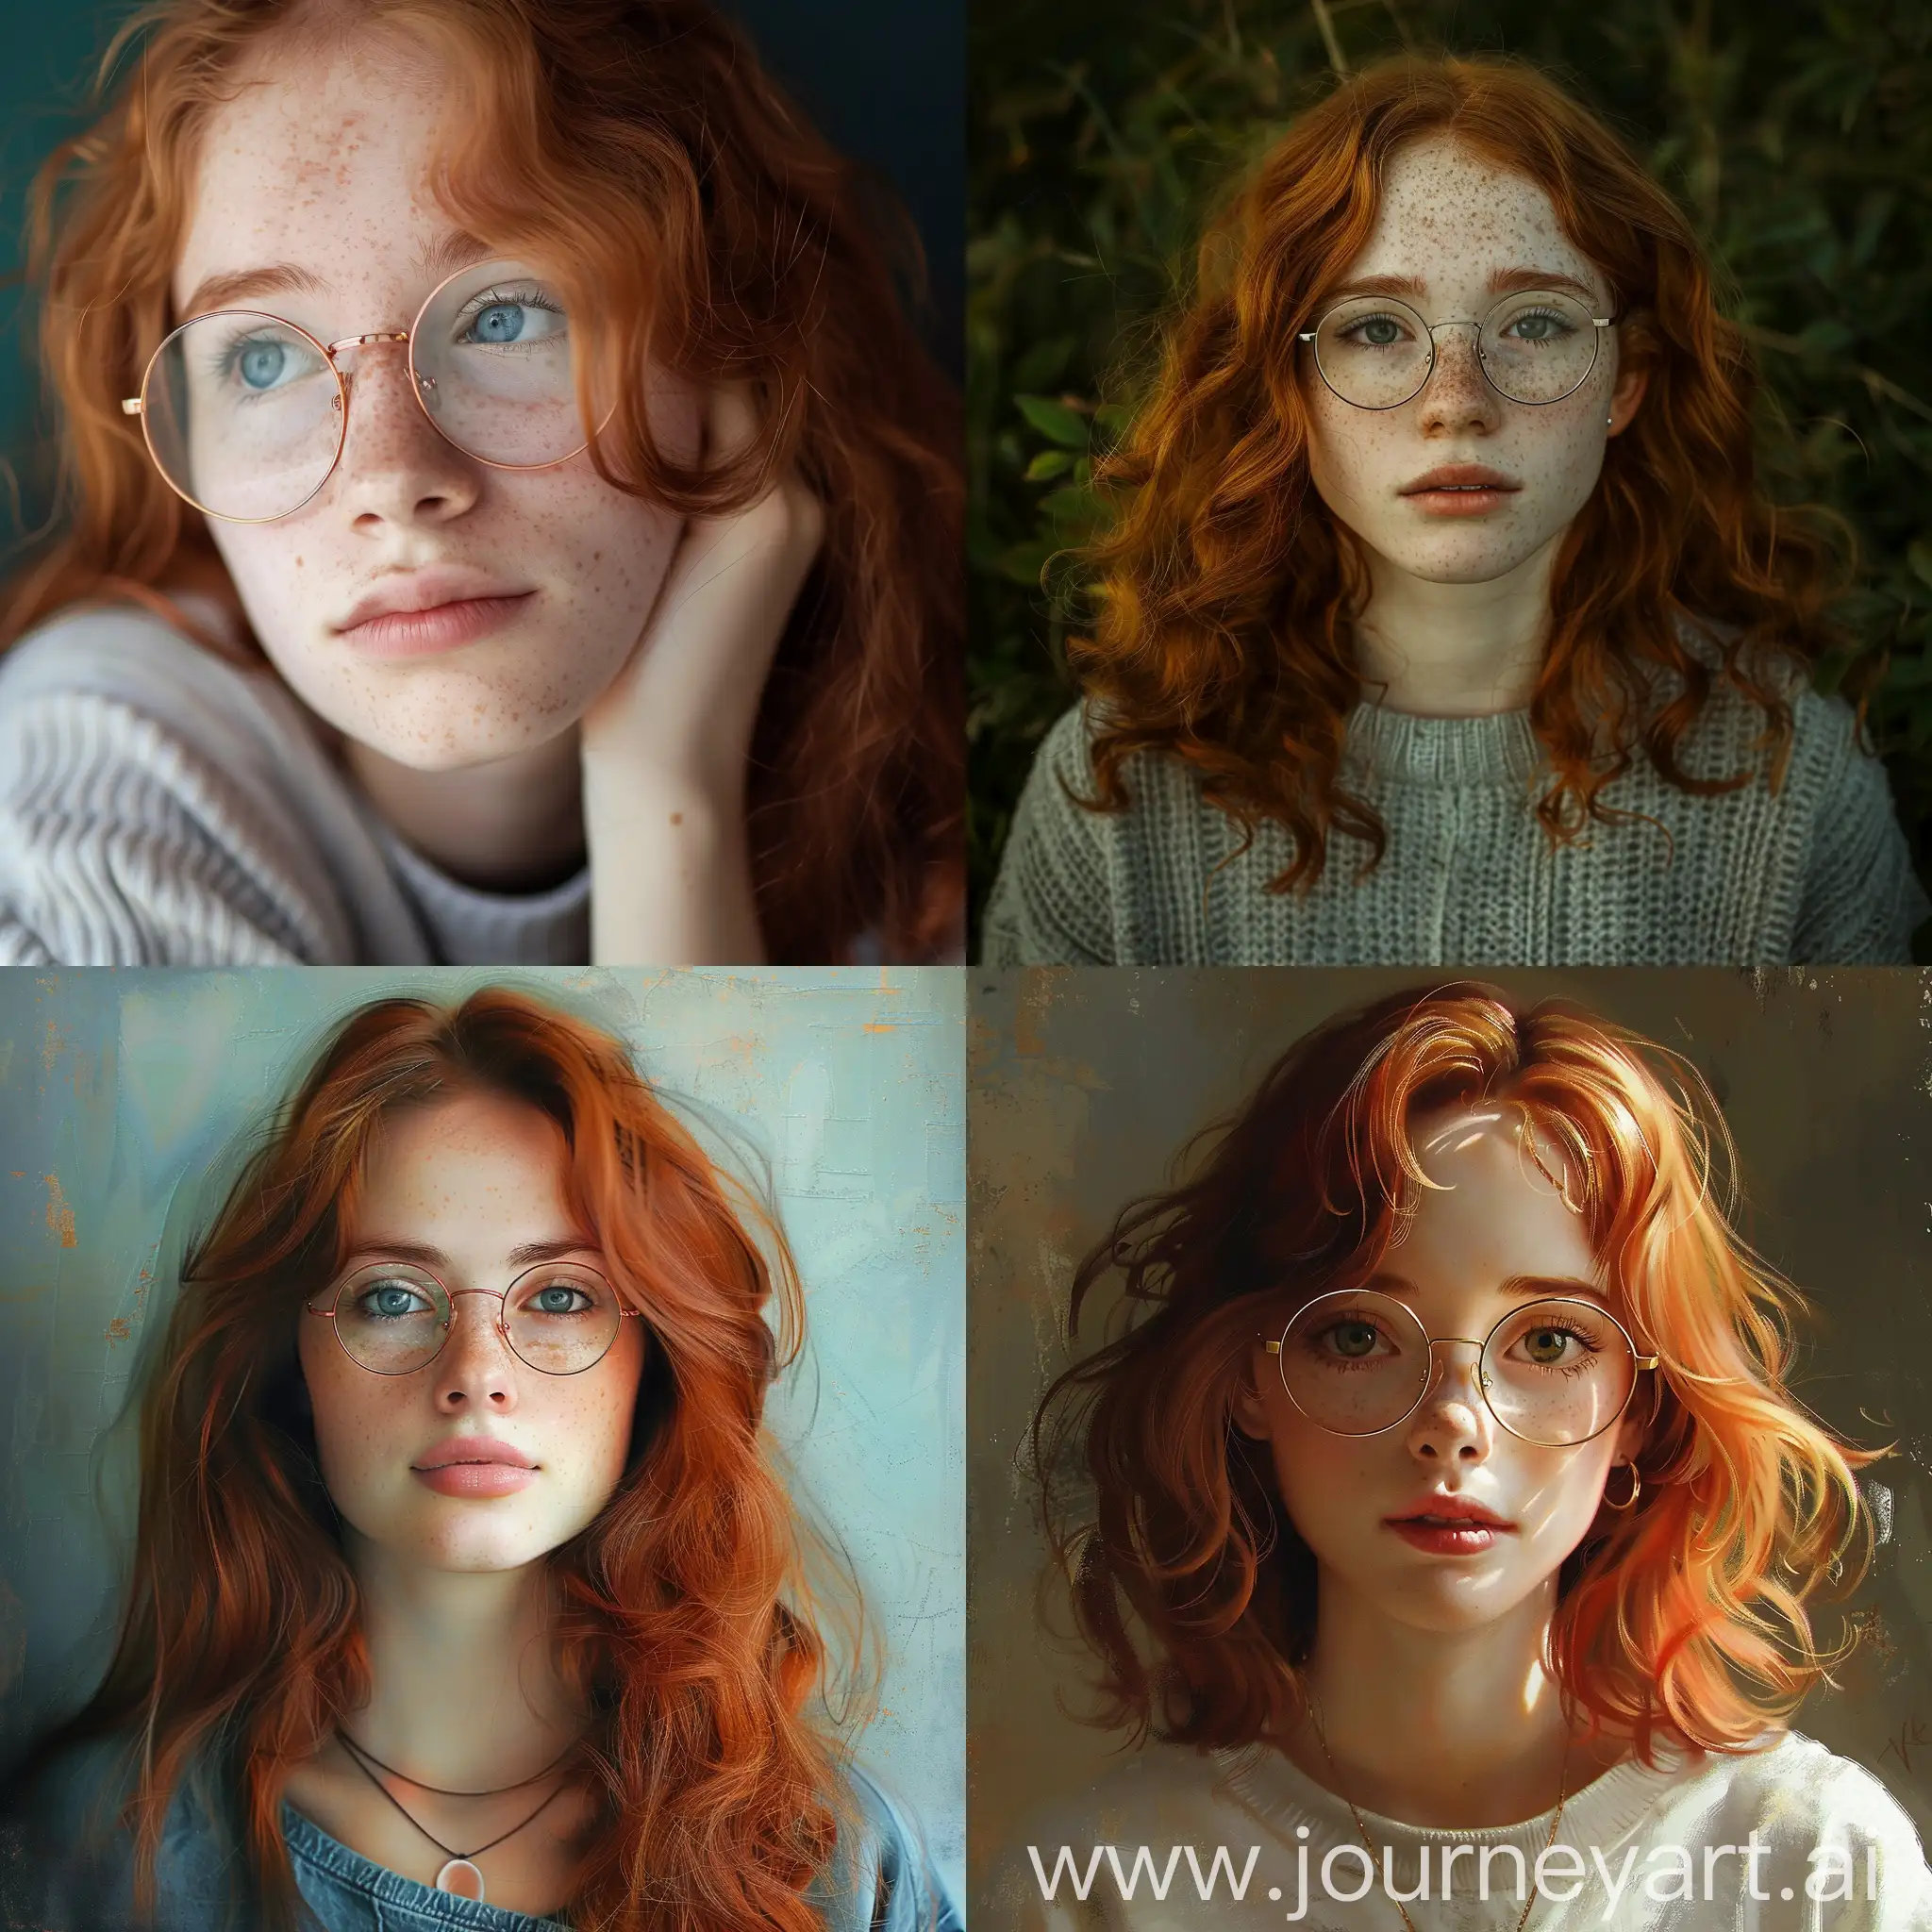 young redhead girl with glasses